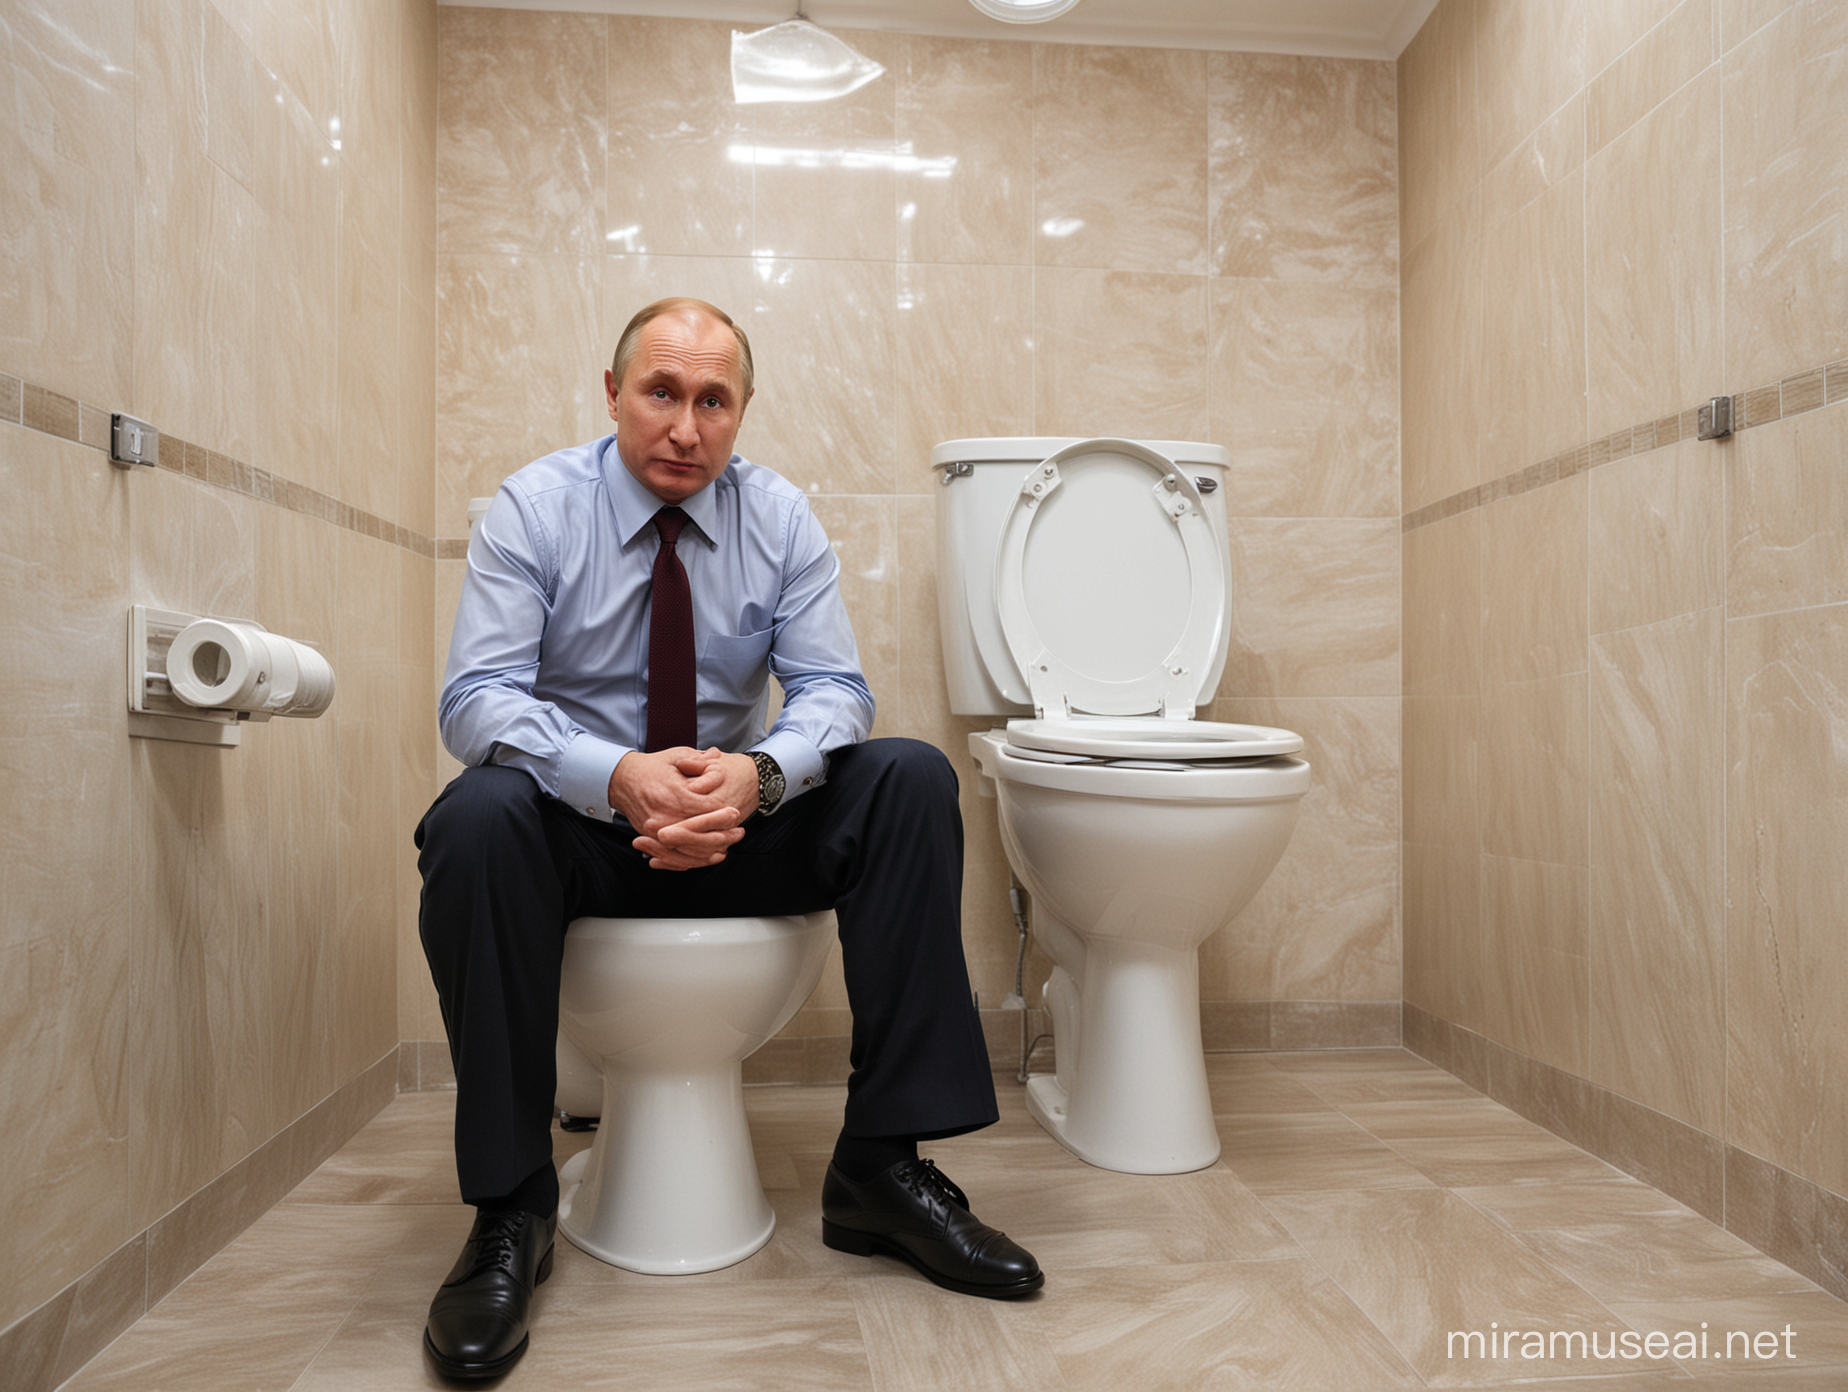 vladimir putin sits by the toilet and looks up at the ceiling in shock, catching a bomb with both hands.